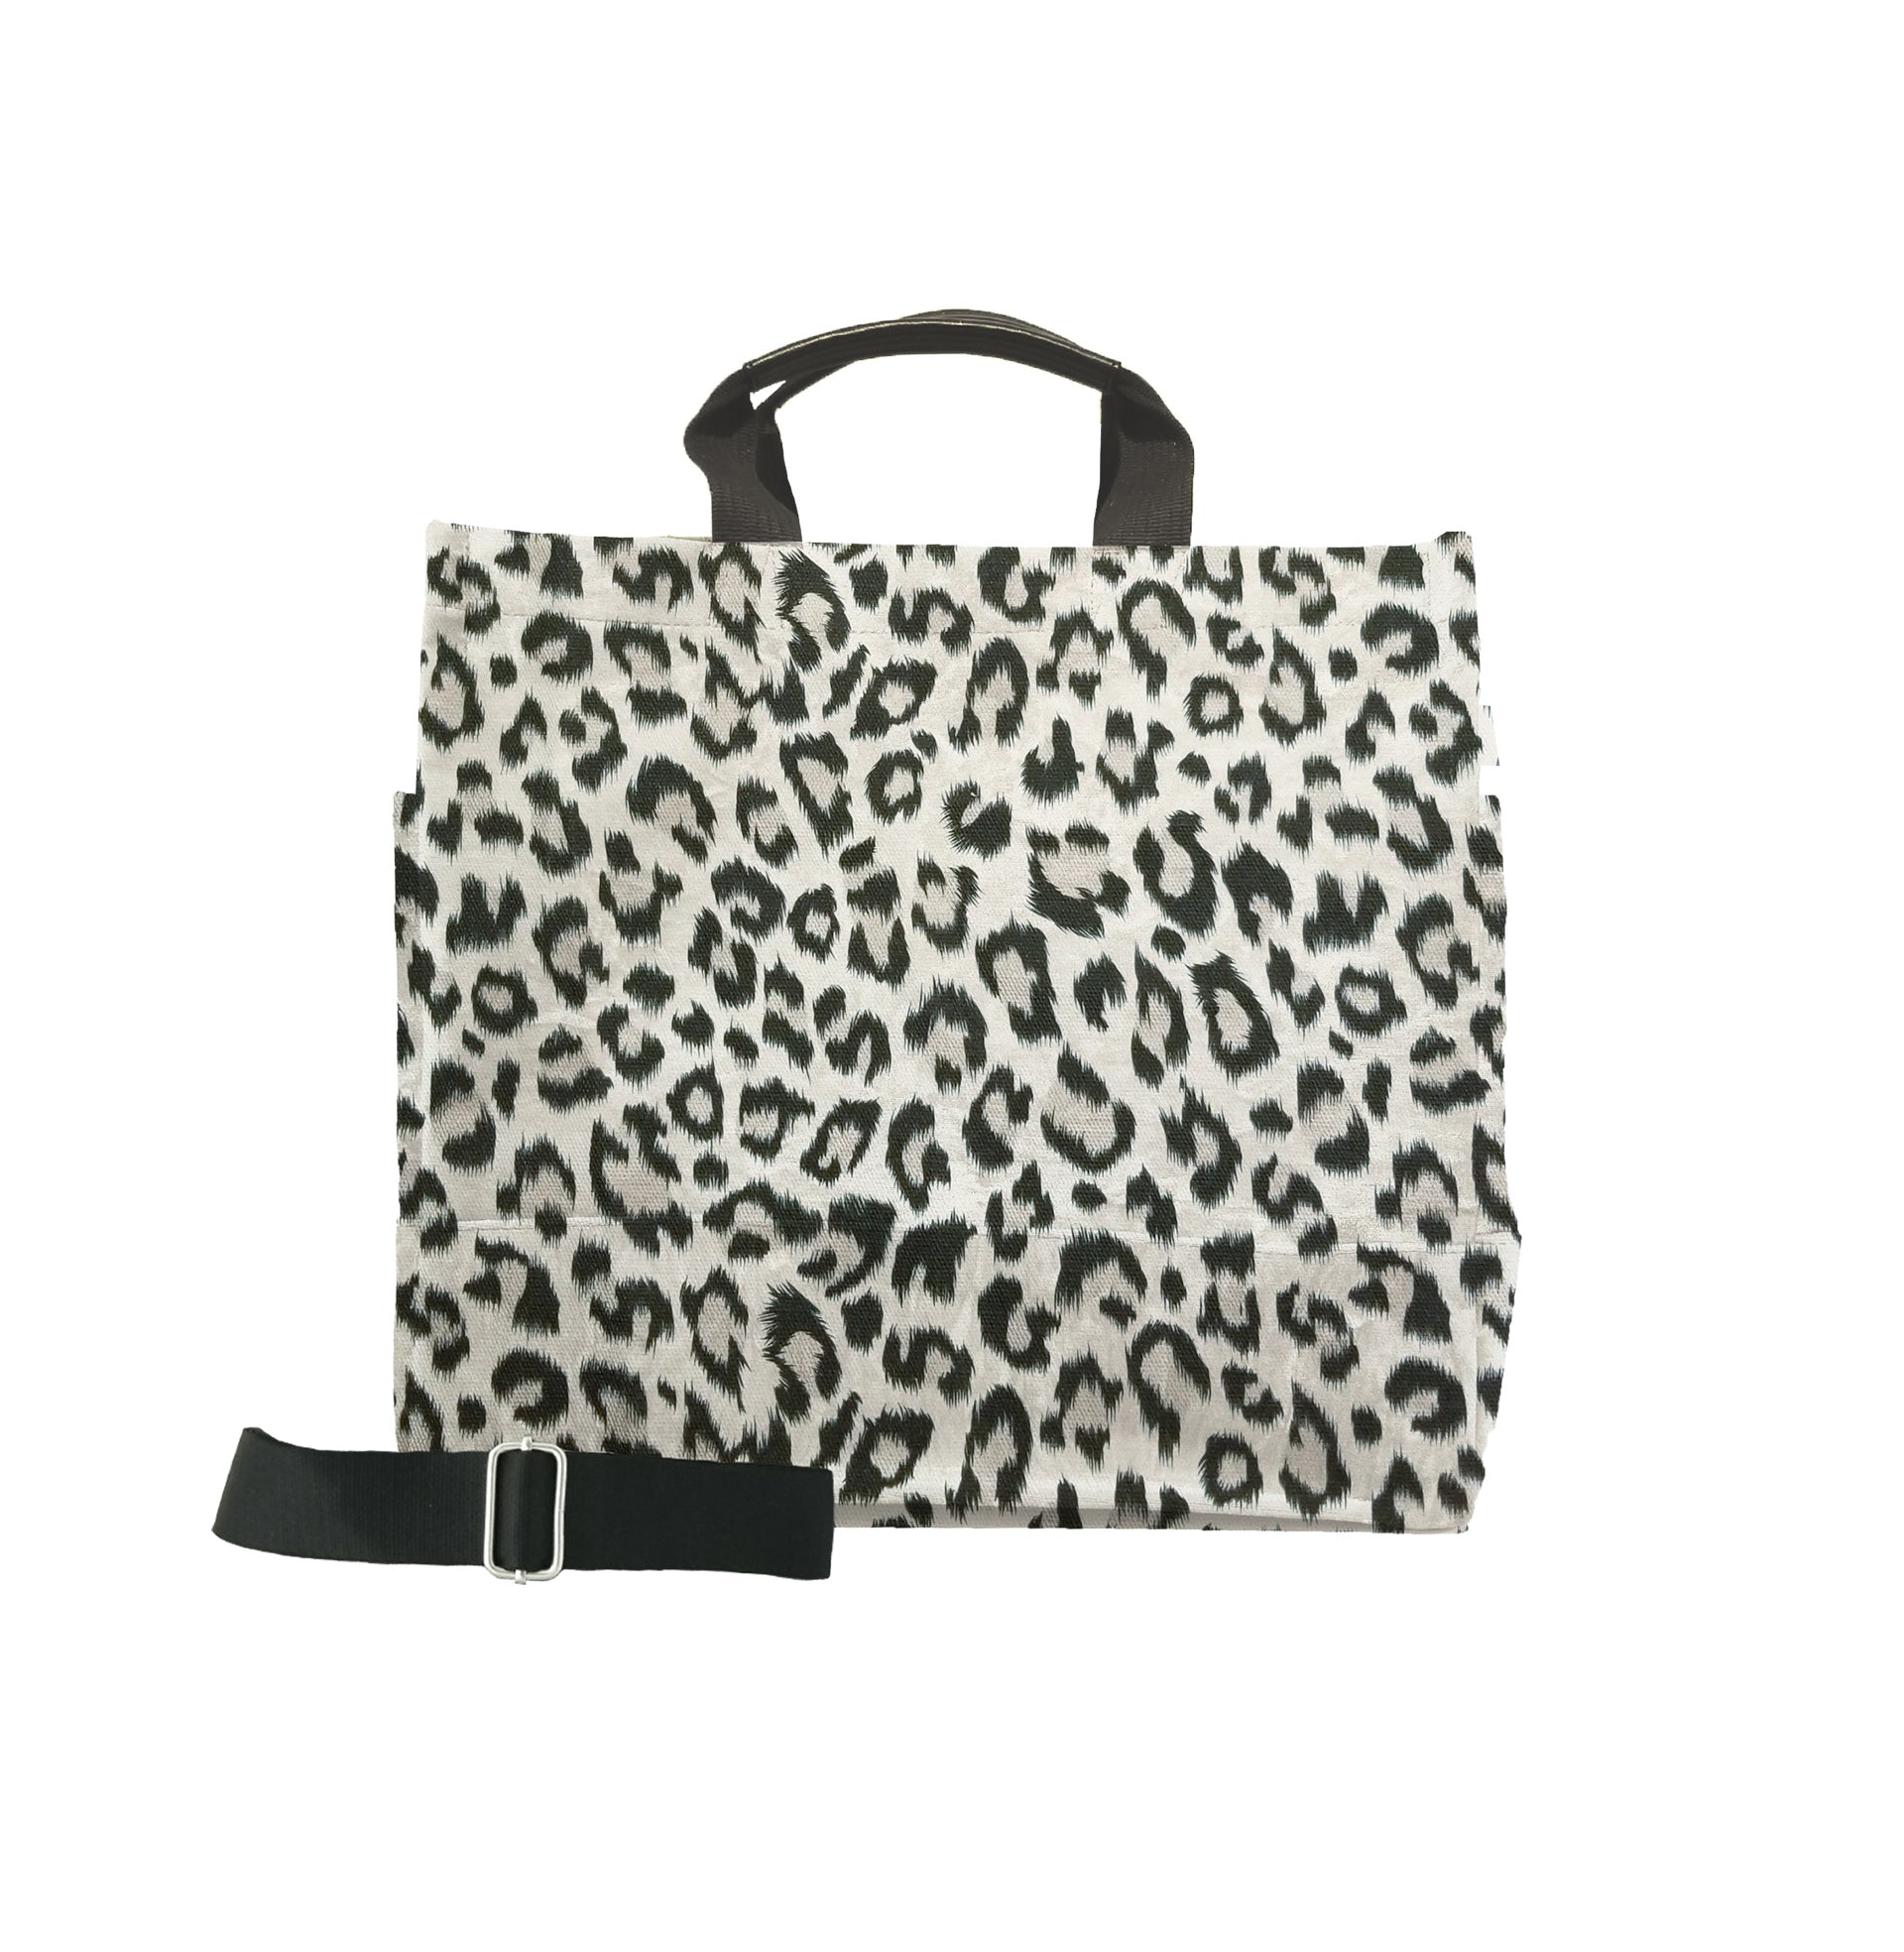 Luxe North South Bag: Black Leopard